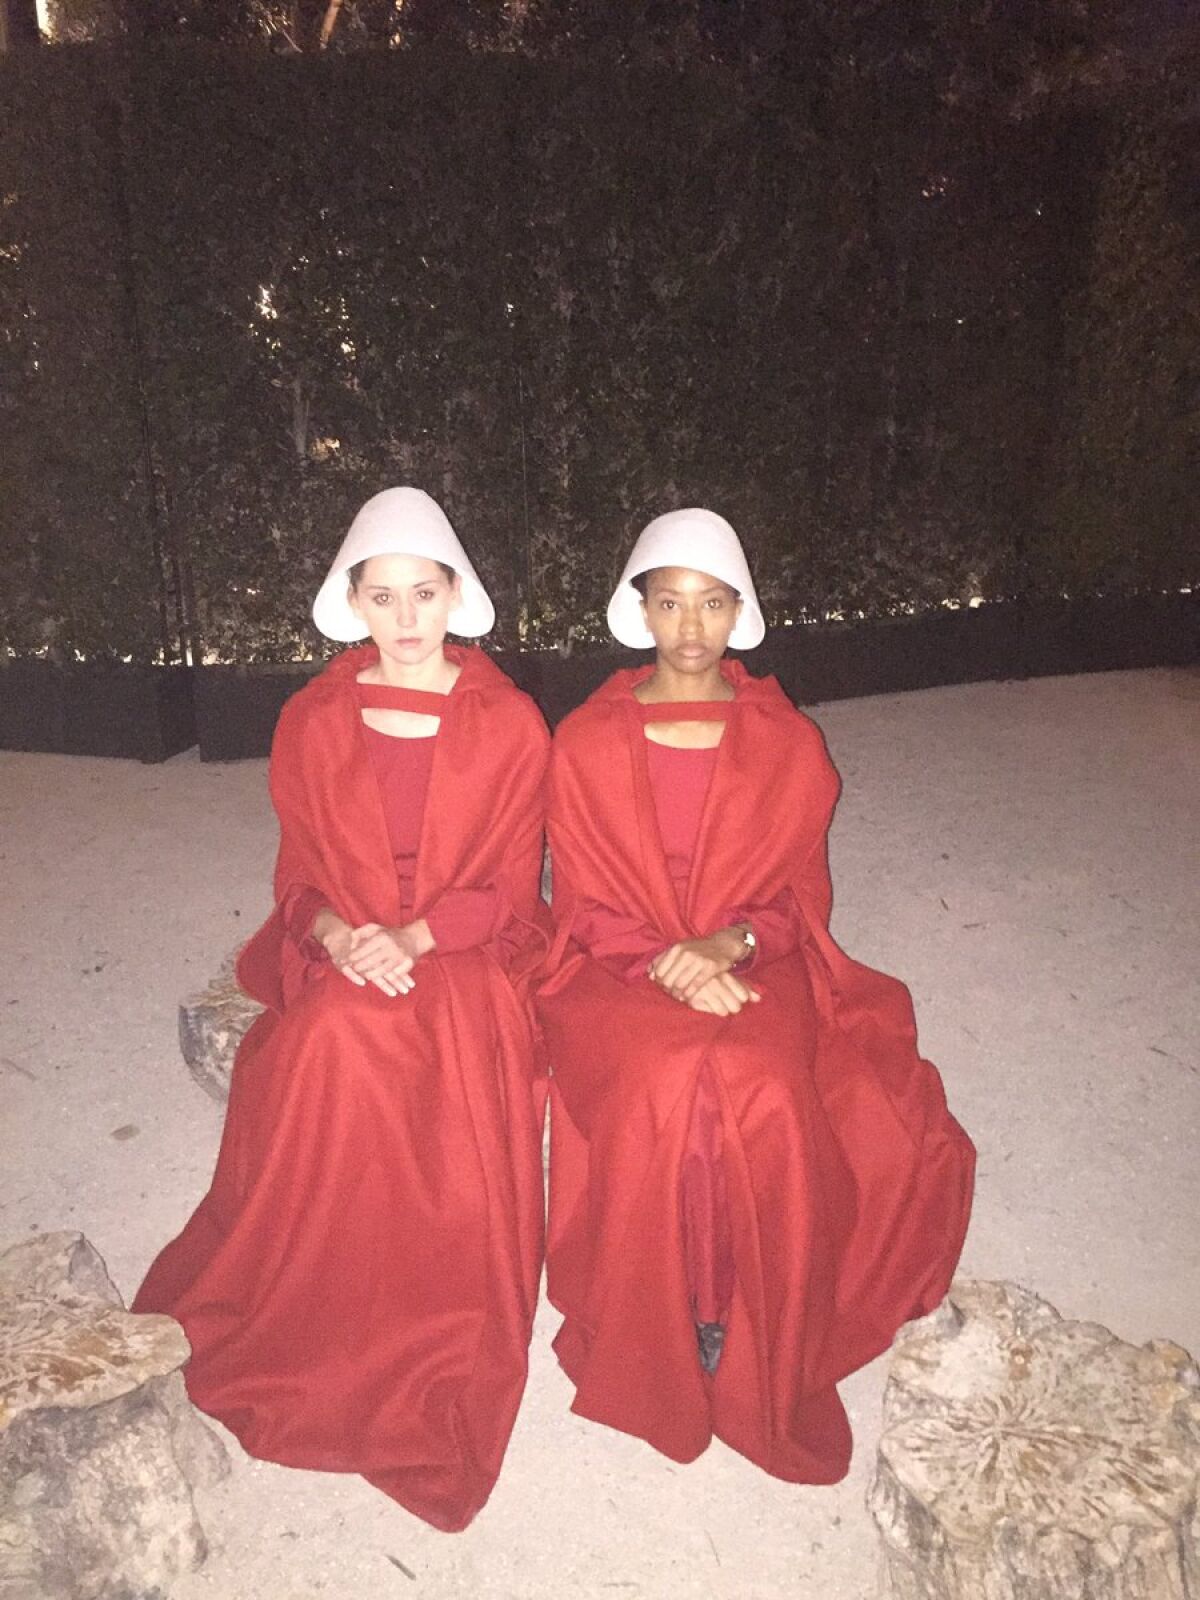 "Handmaids" await guests outside the Hulu party.